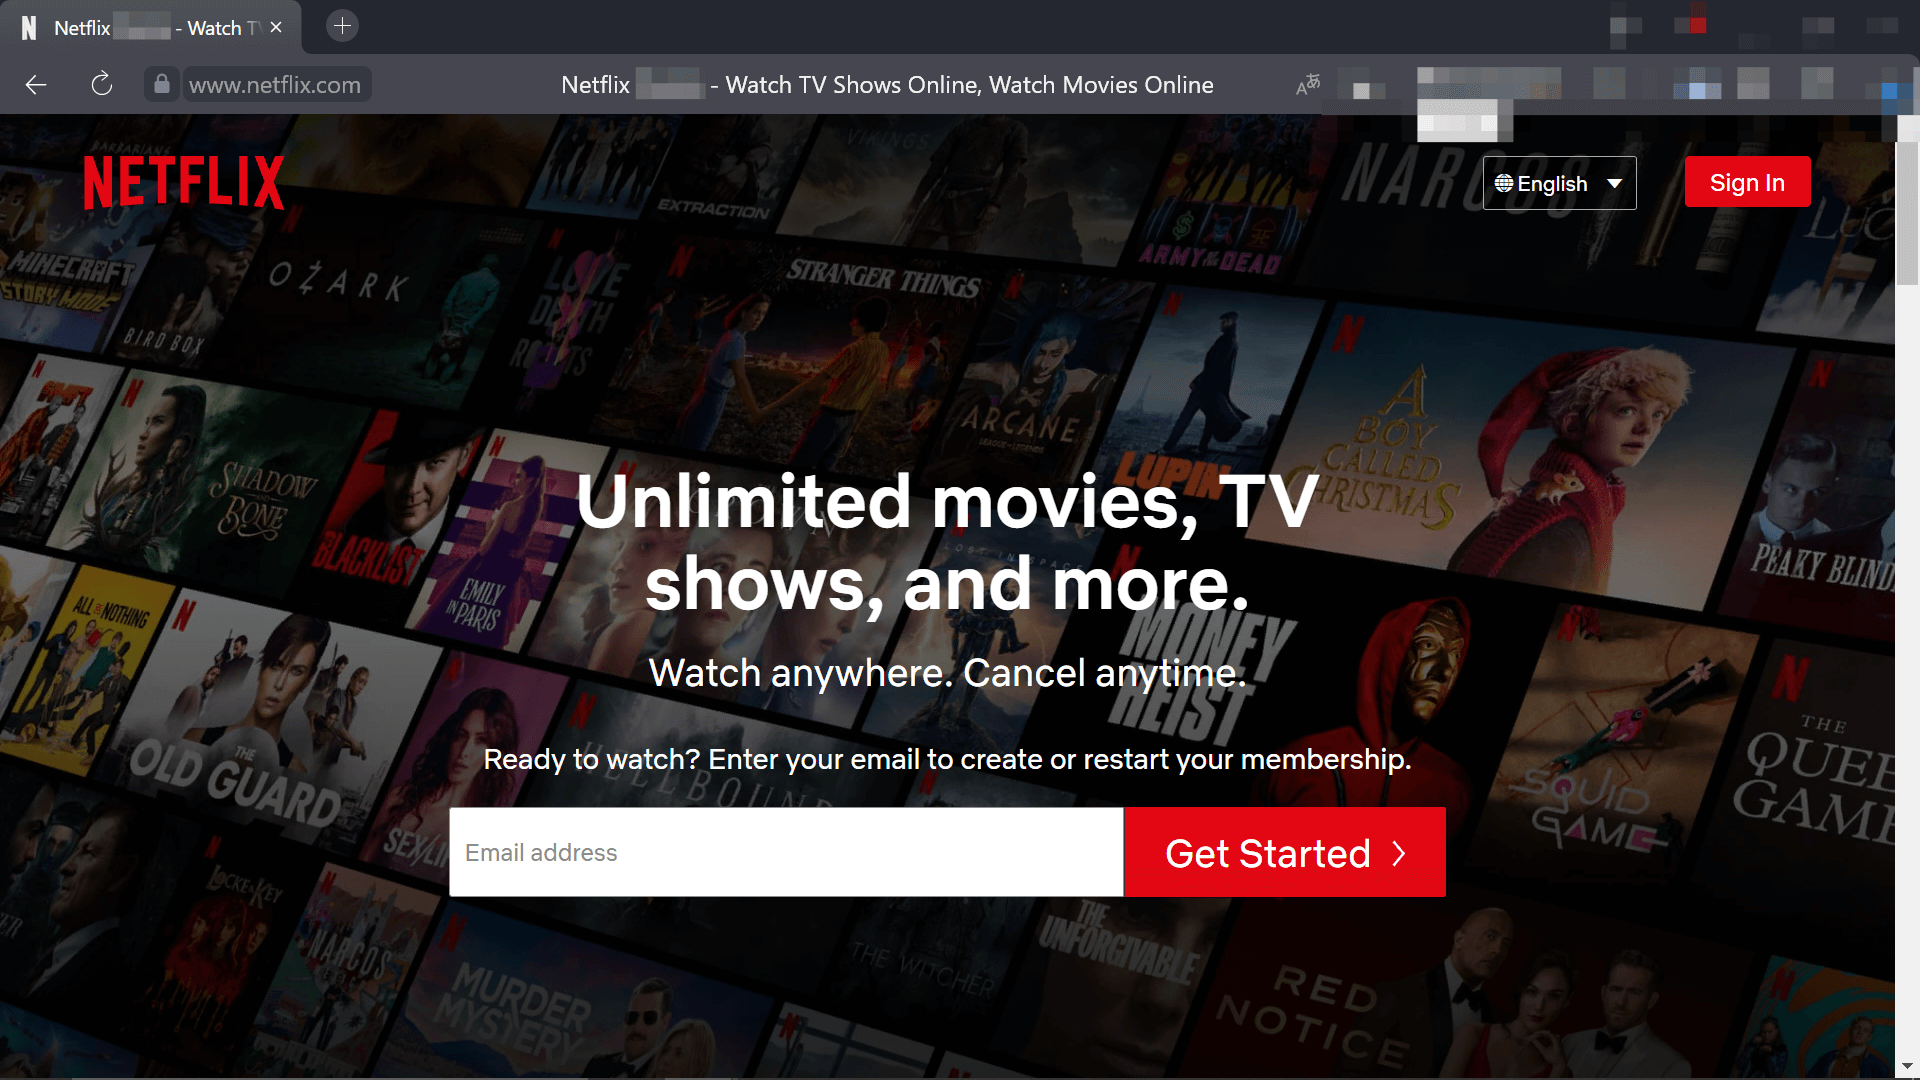 Netflix as an example of a store of digital products